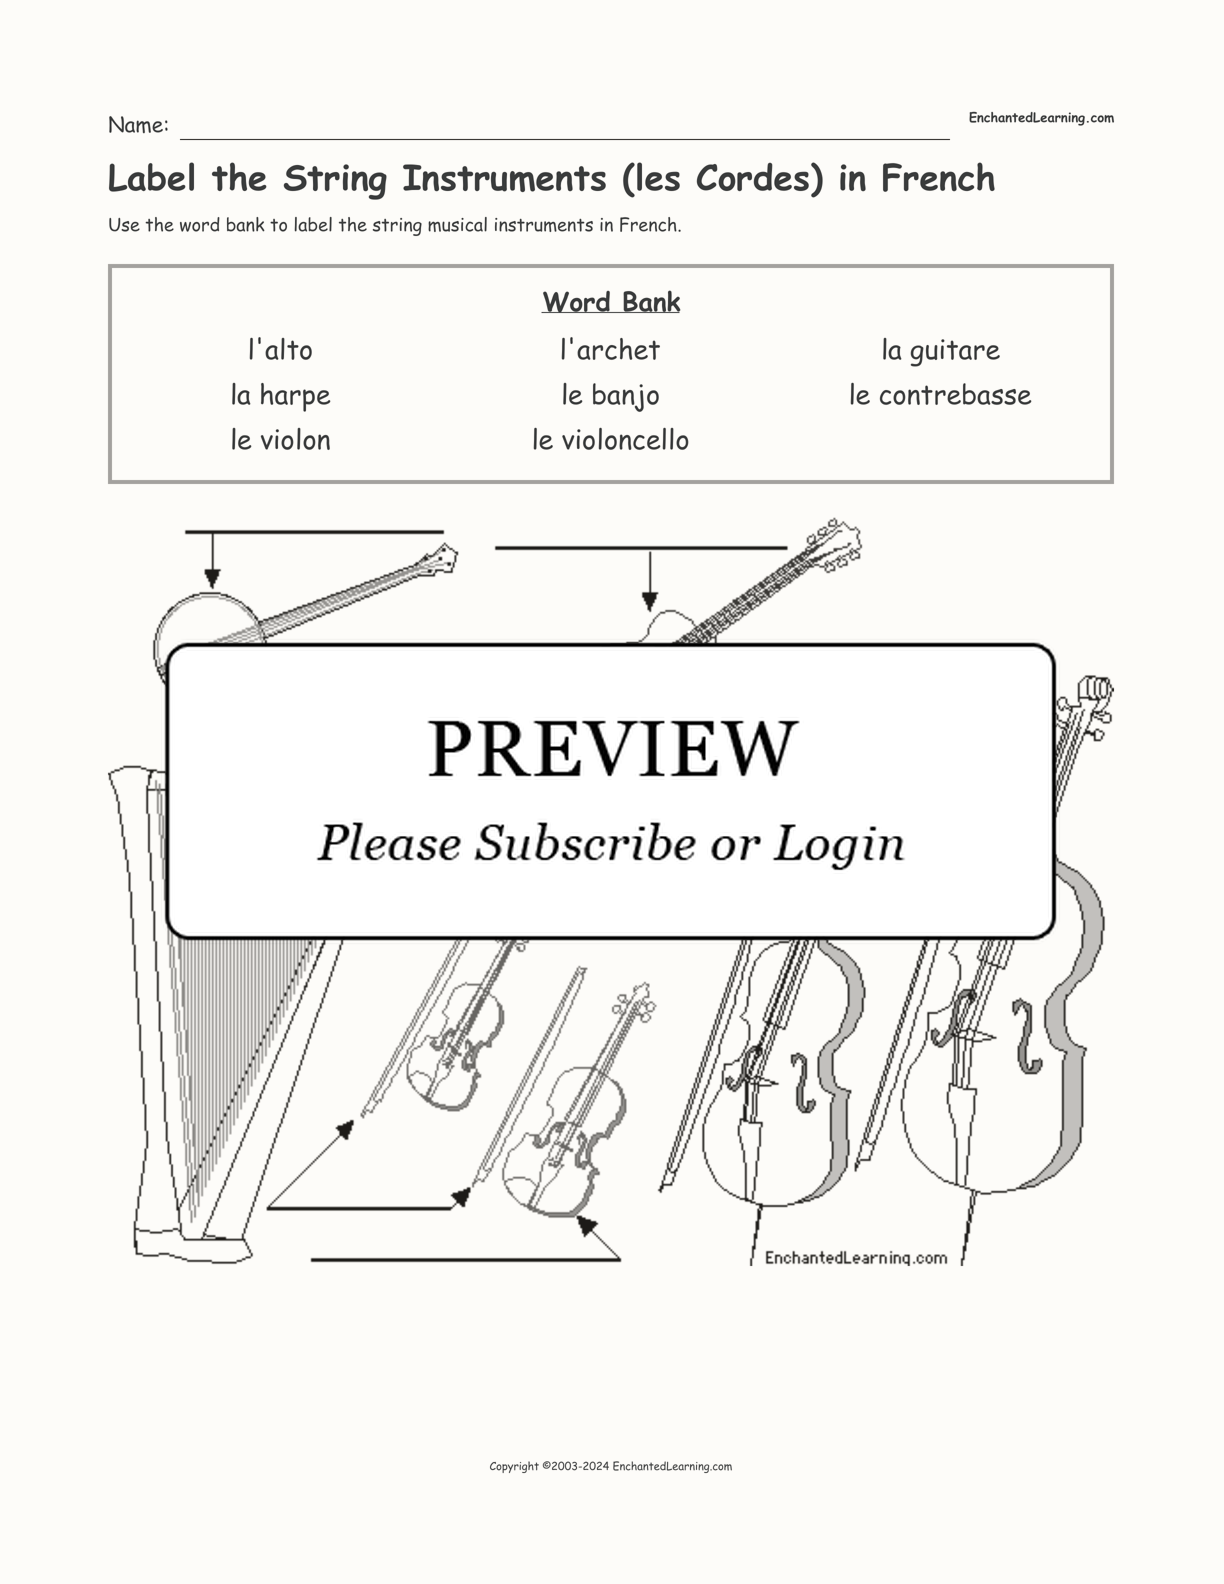 Label the String Instruments (les Cordes) in French interactive worksheet page 1